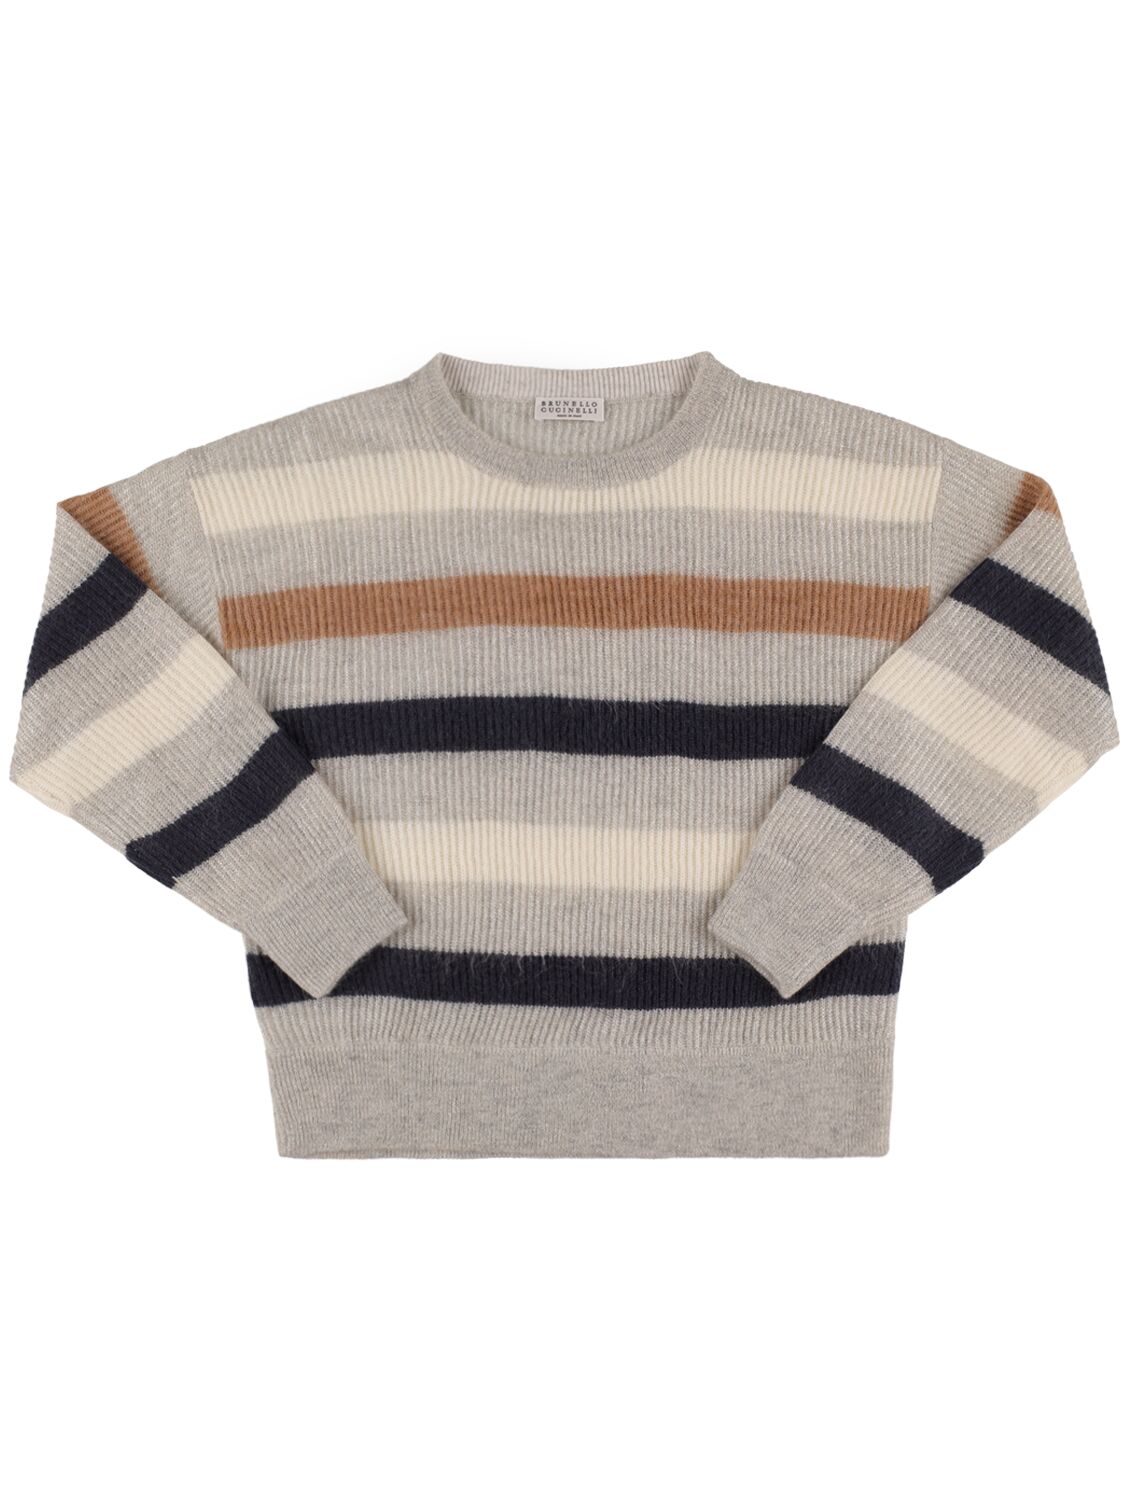 Image of Lurex Striped Mohair Blend Sweater